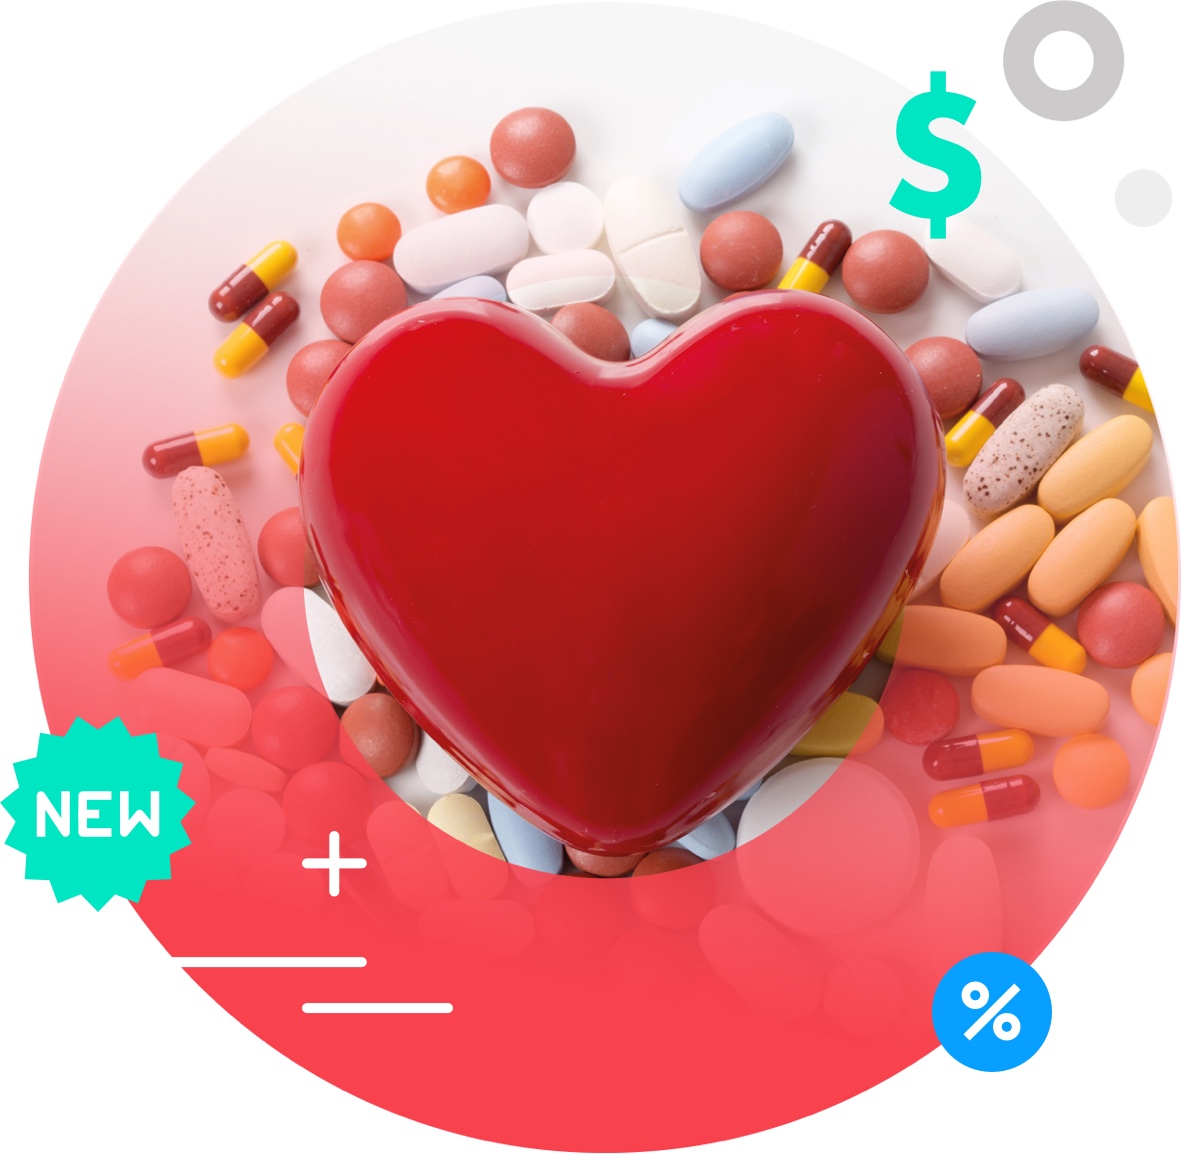 image of multiple pills representing the health industry as a whole